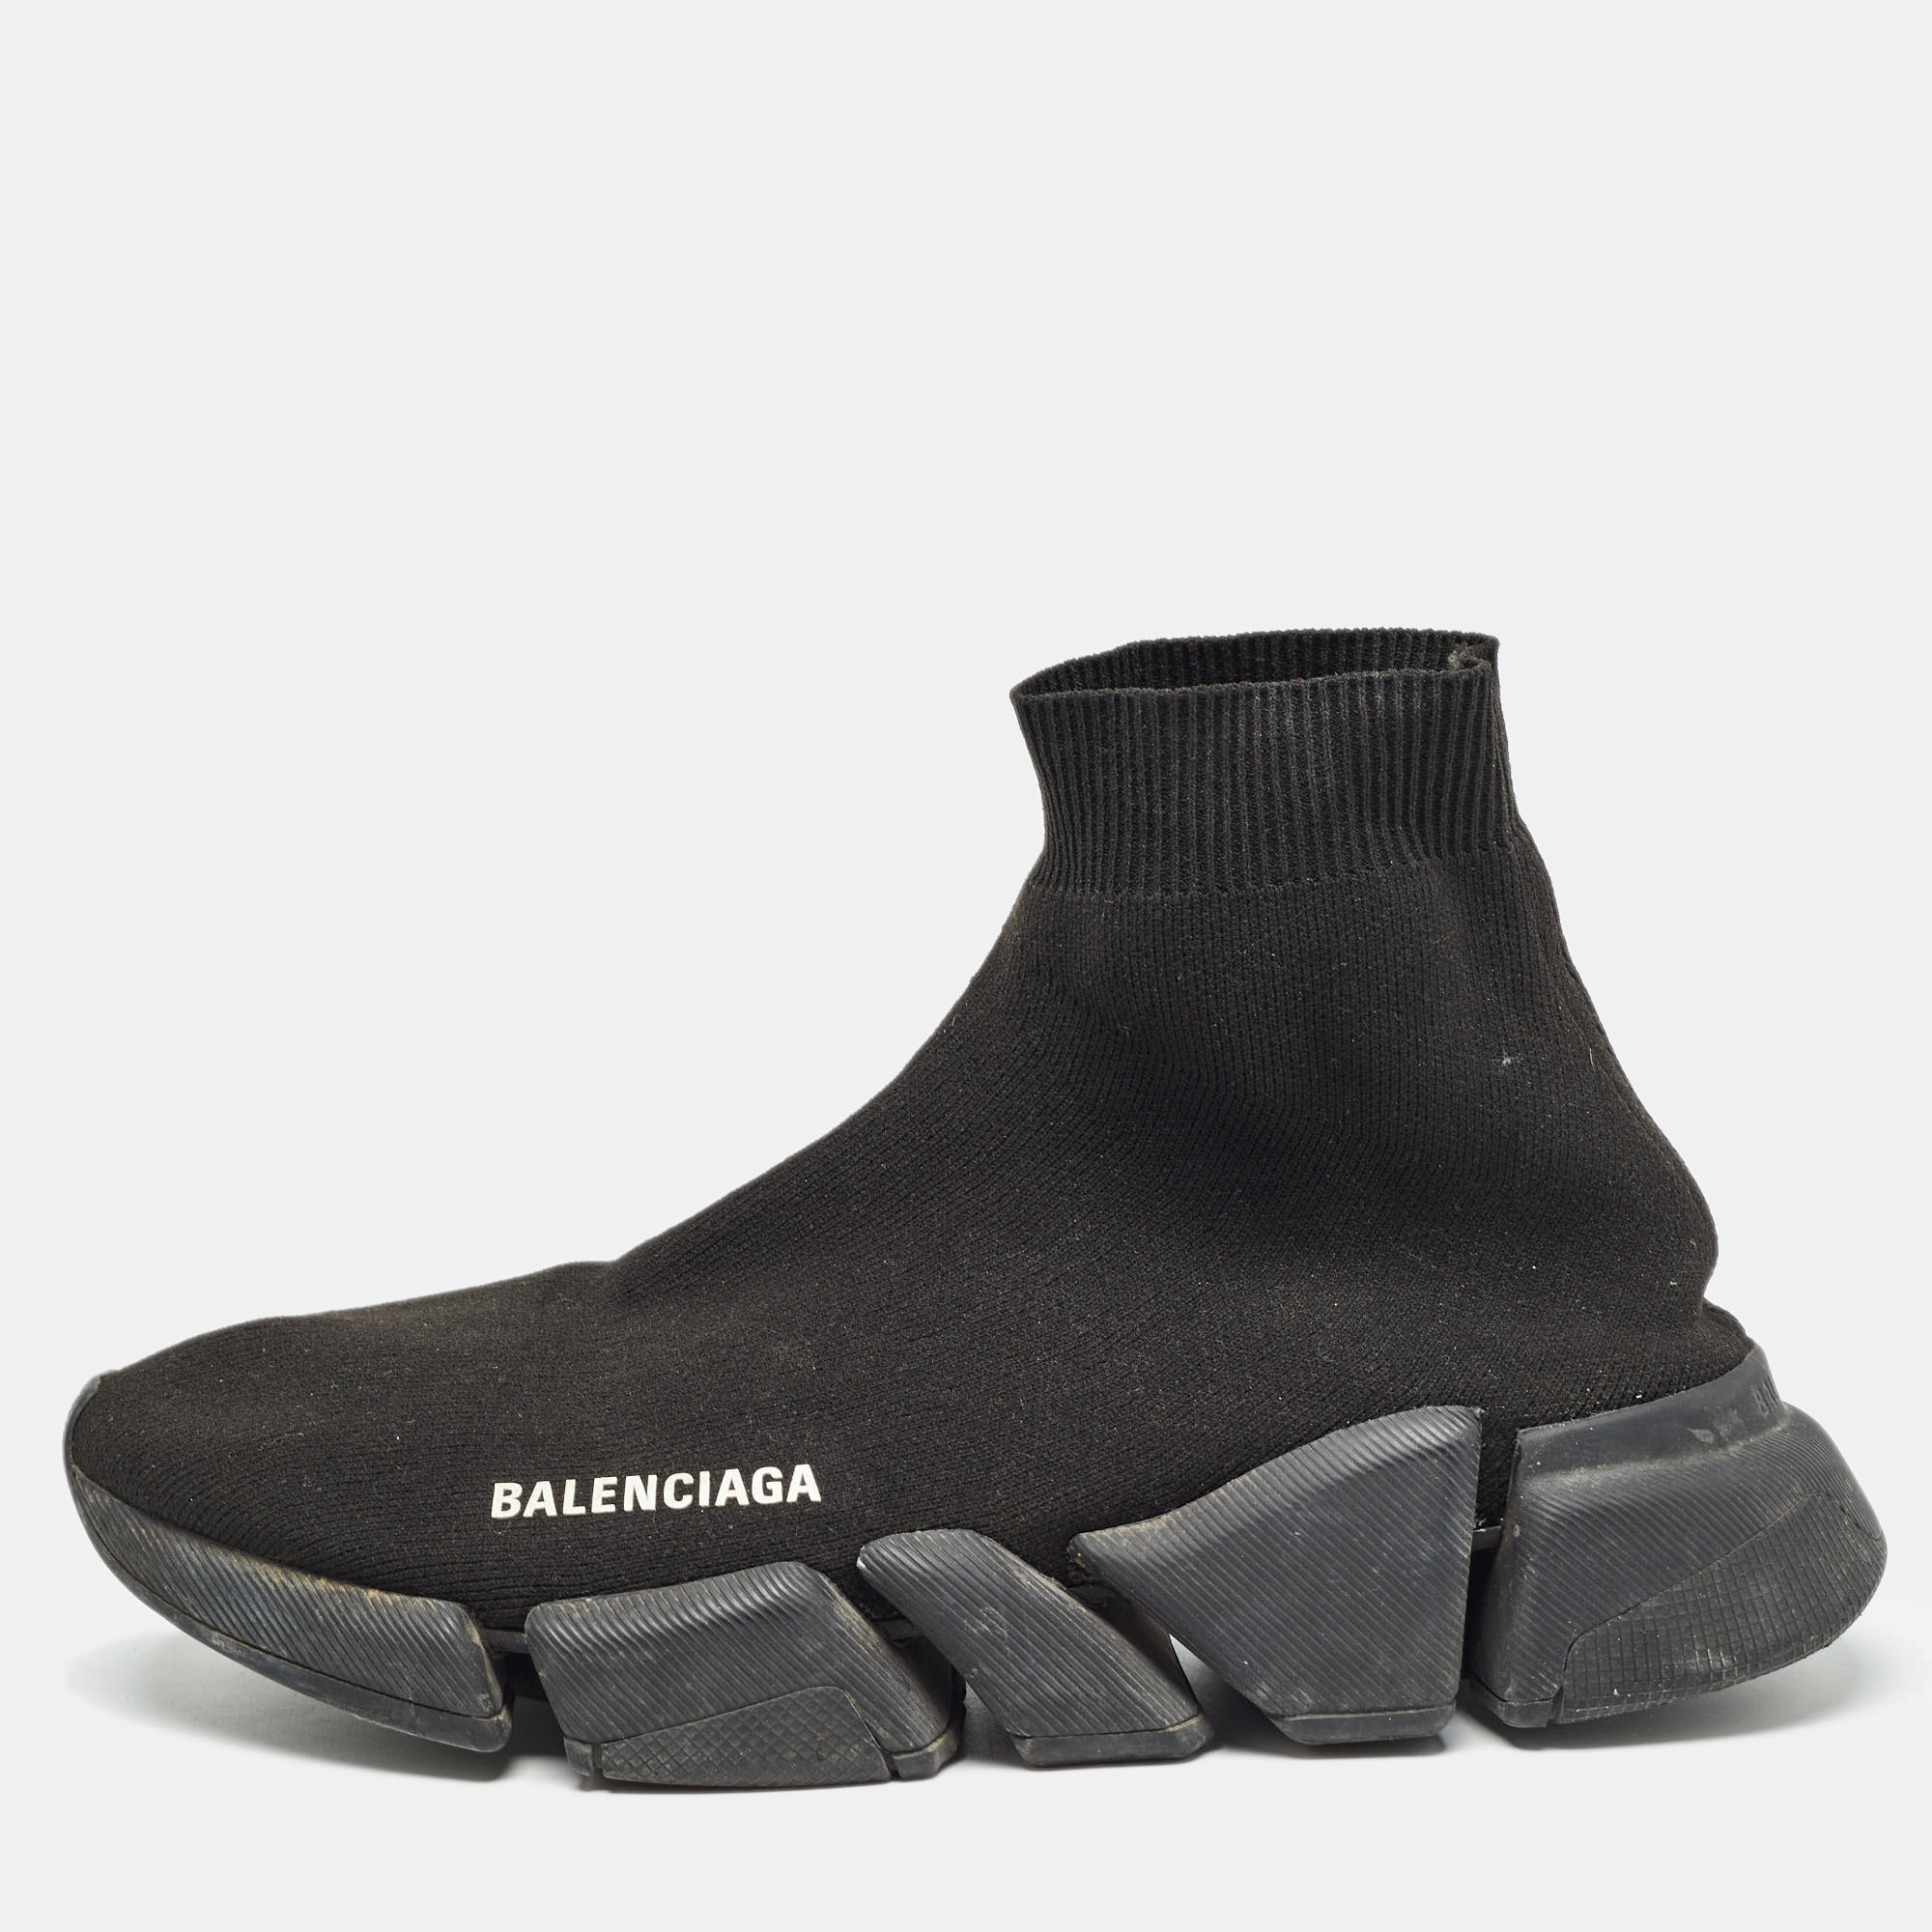 Balenciaga black knit fabric speed trainer sneakers size 39